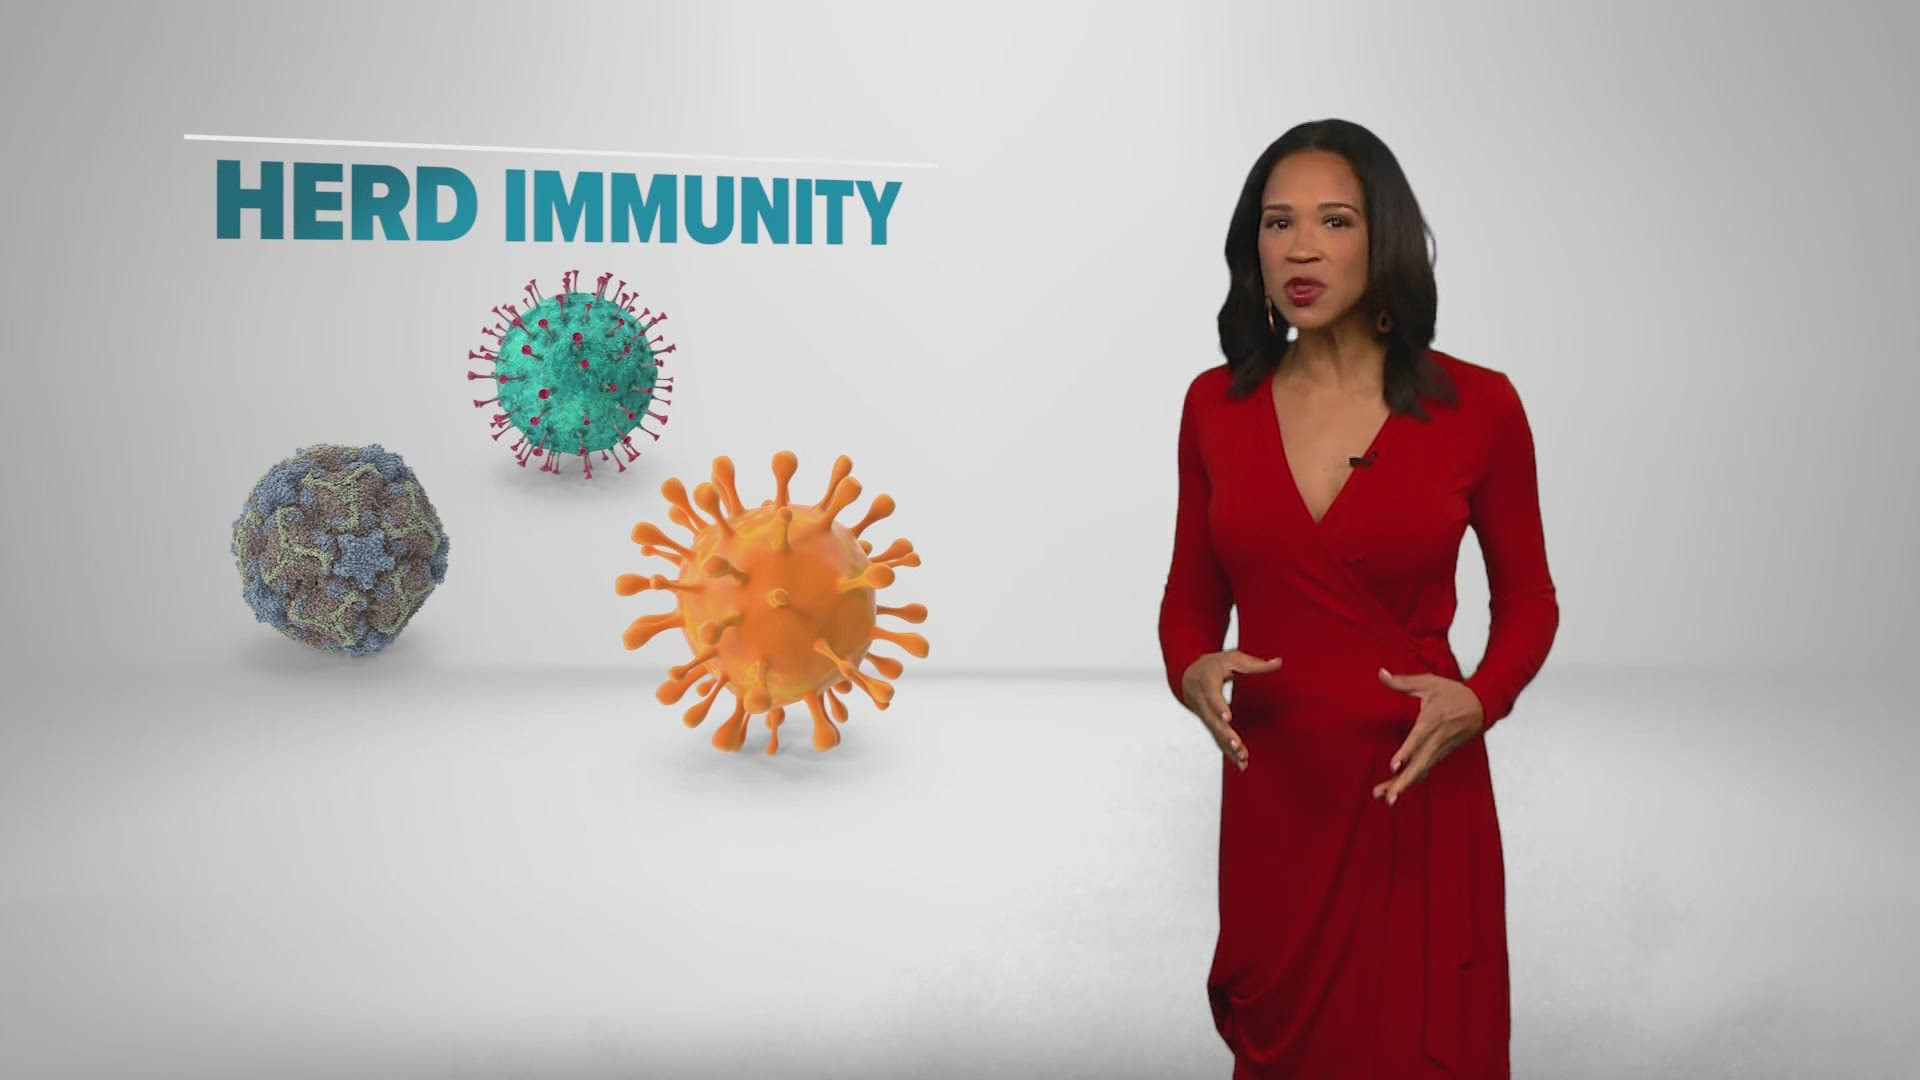 Experts don't yet know how many people it would take to reach herd immunity with COVID-19, since the virus is so new.